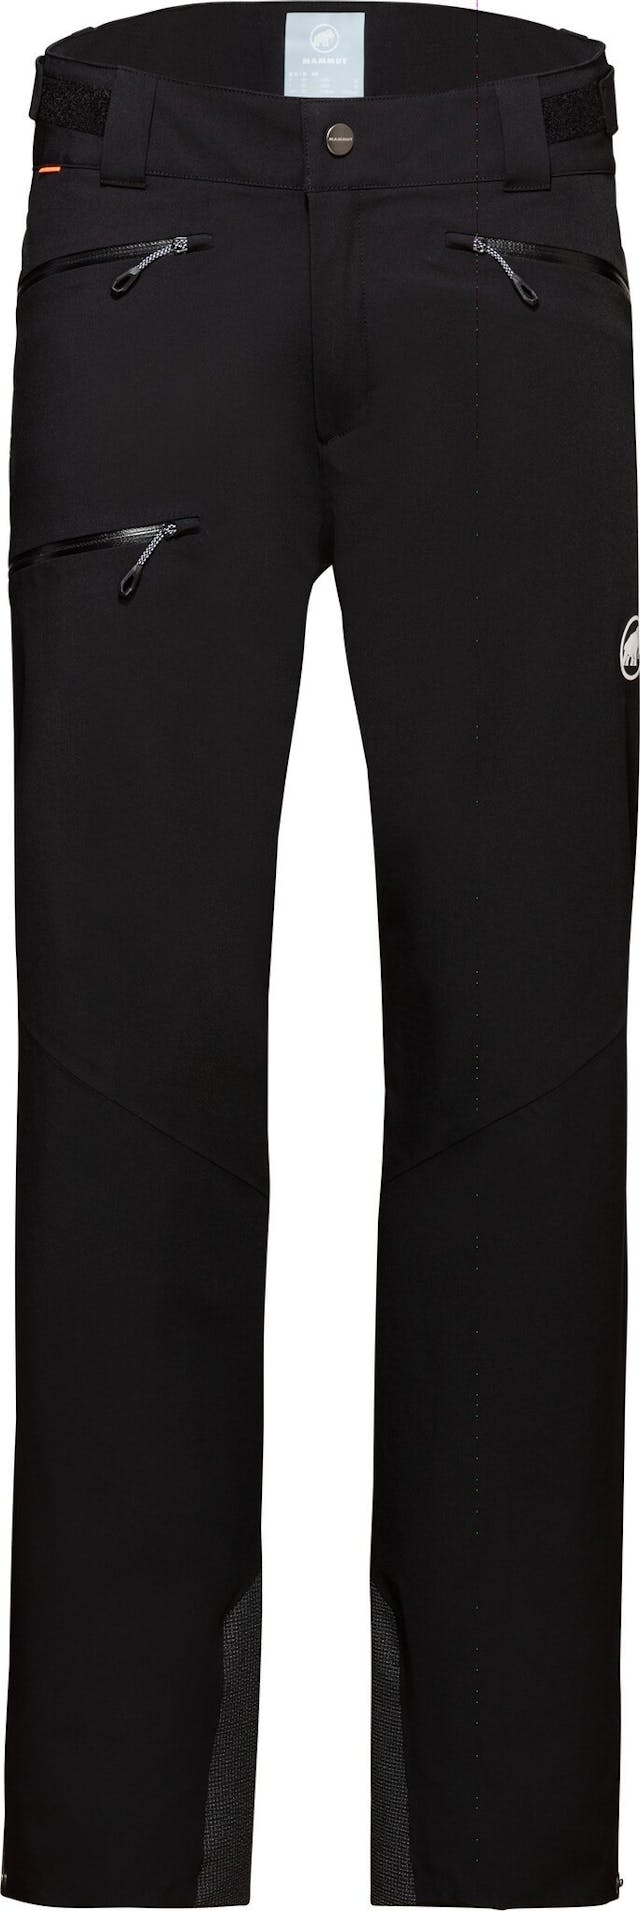 Product image for Stoney HS Thermo Pants - Men's